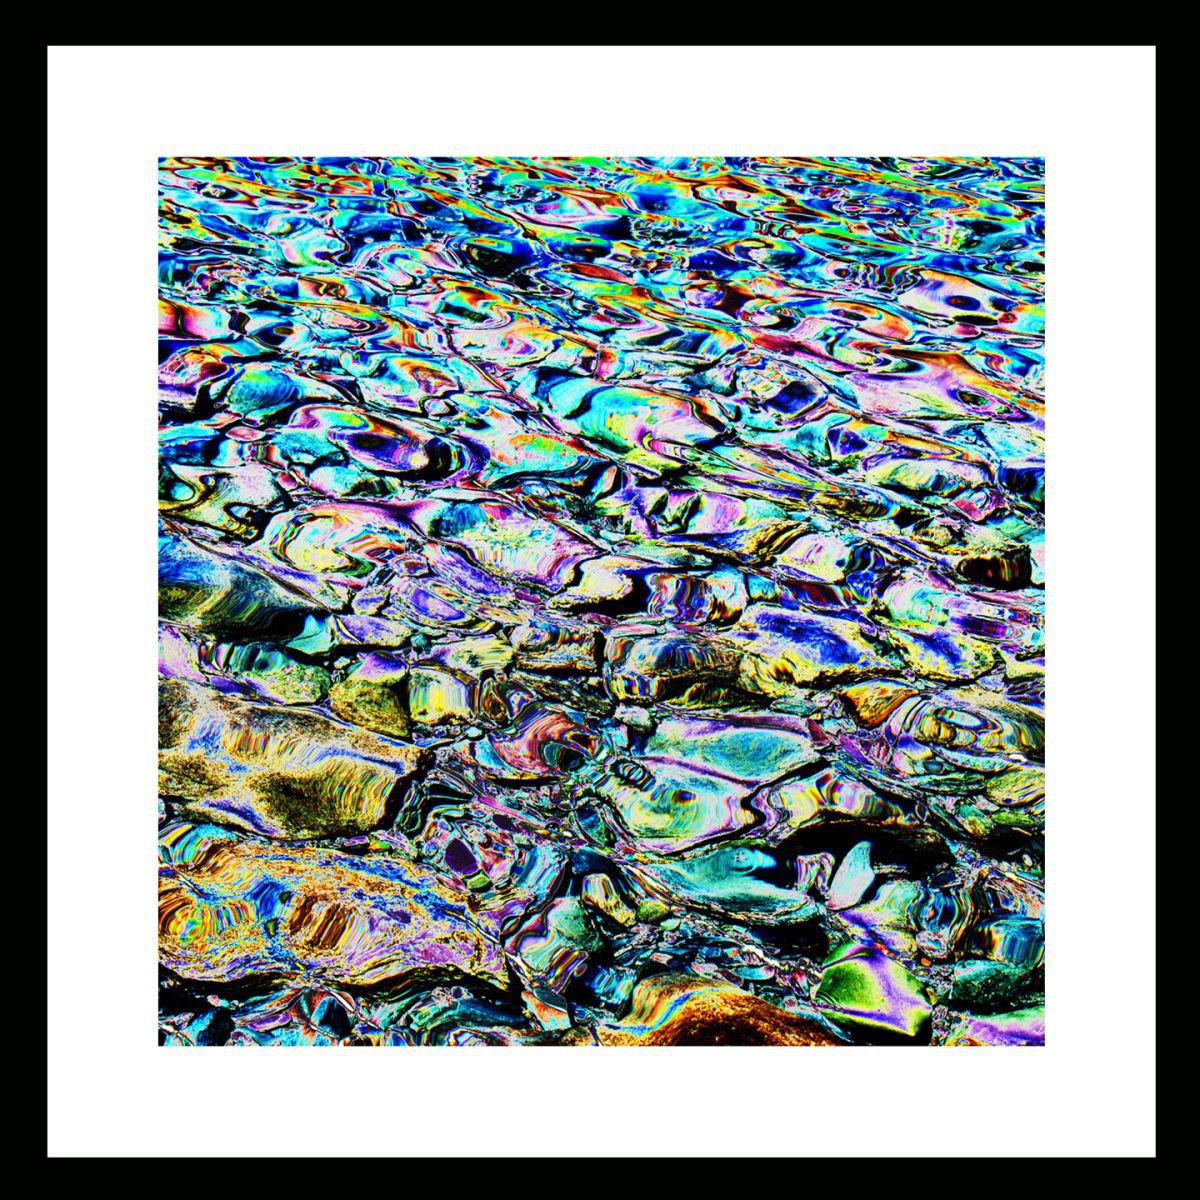 Natural Abstracts - Lake Pebbles number 3 by Ken Skehan